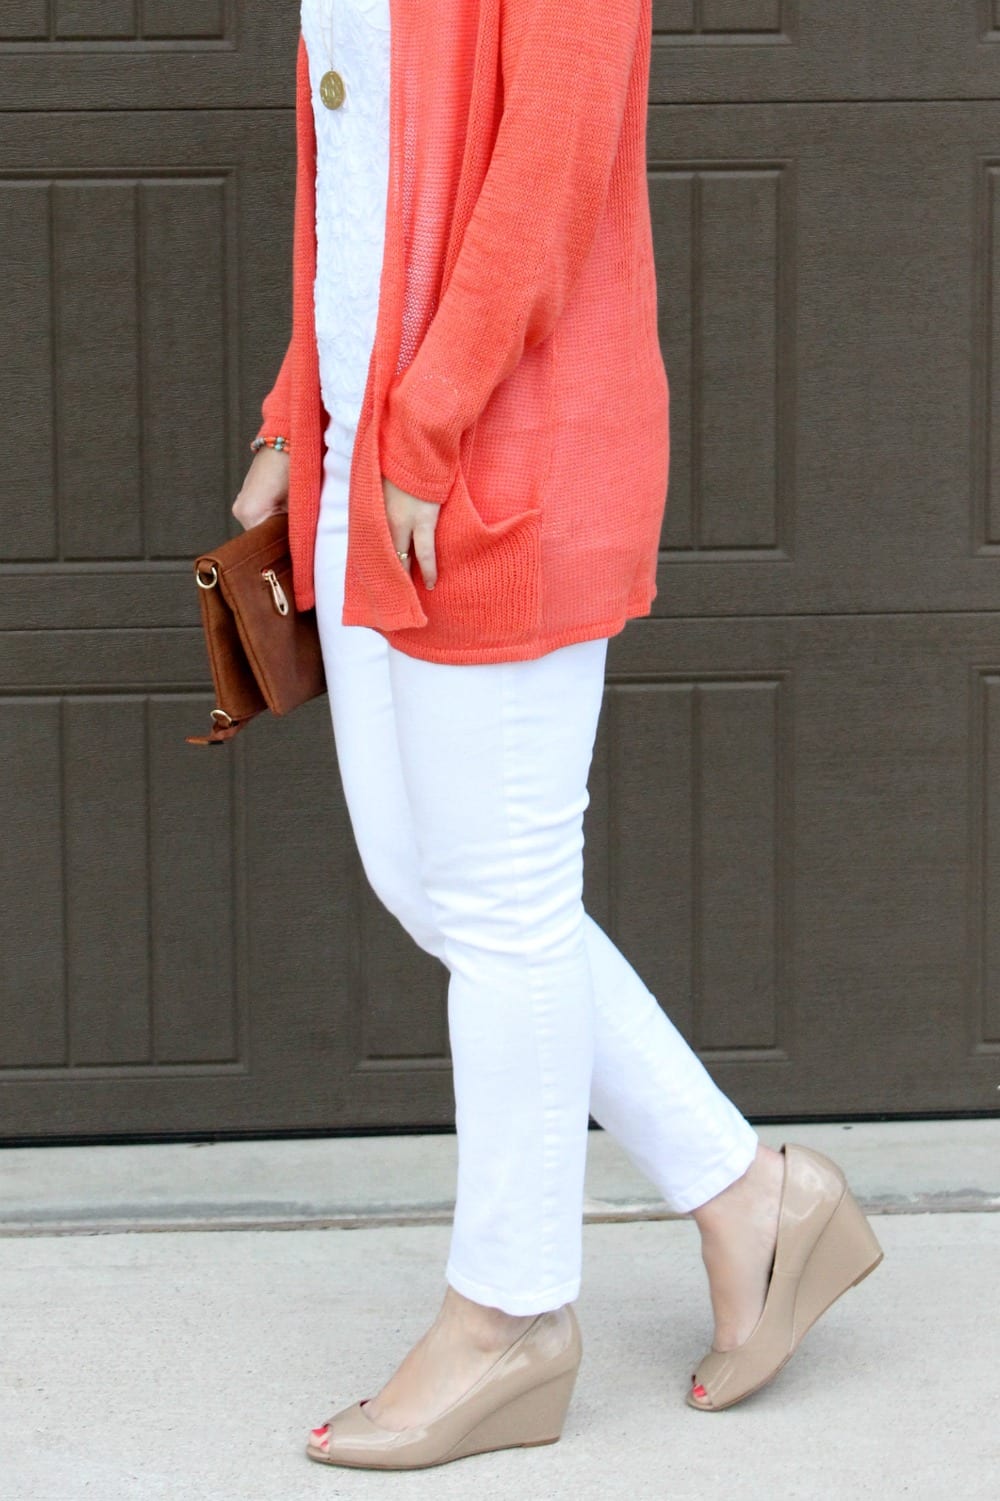 Spring outfit idea - nude patent wedges, white denim, white lace top and a coal cardigan.